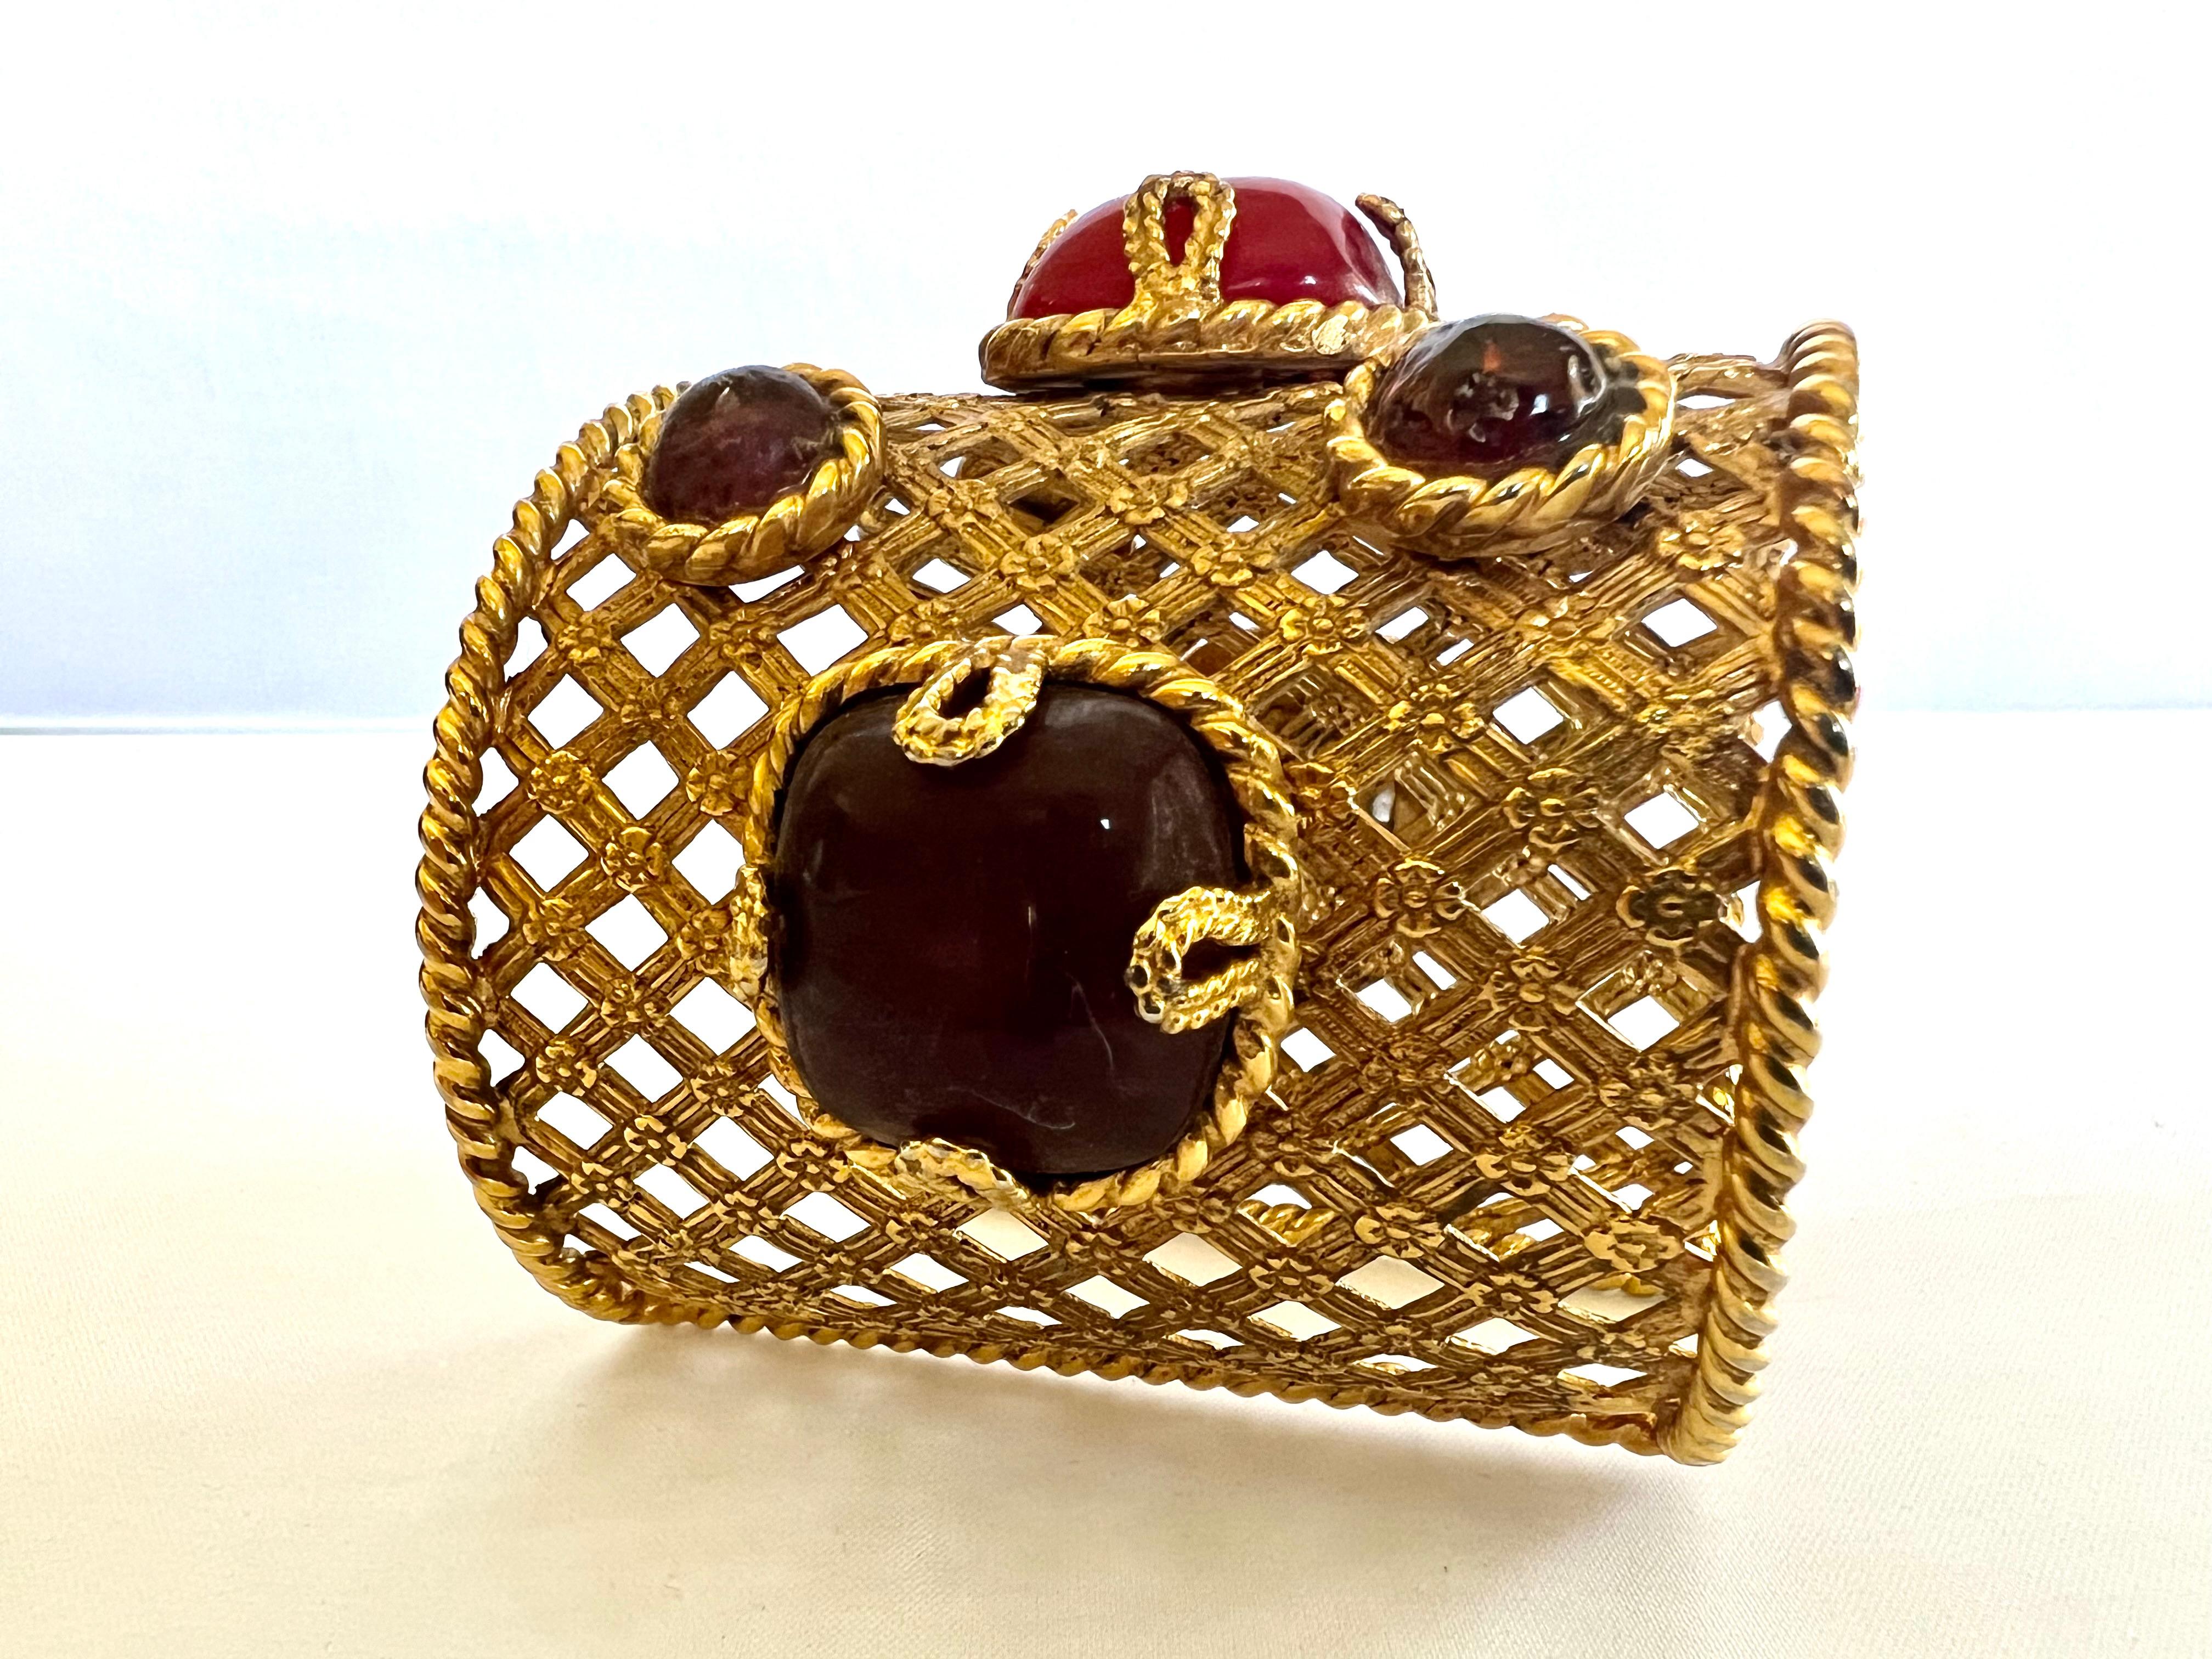 Dominique Aurientis Gilt Molten Glass Jeweled Cuff Bracelet In Excellent Condition For Sale In Palm Springs, CA